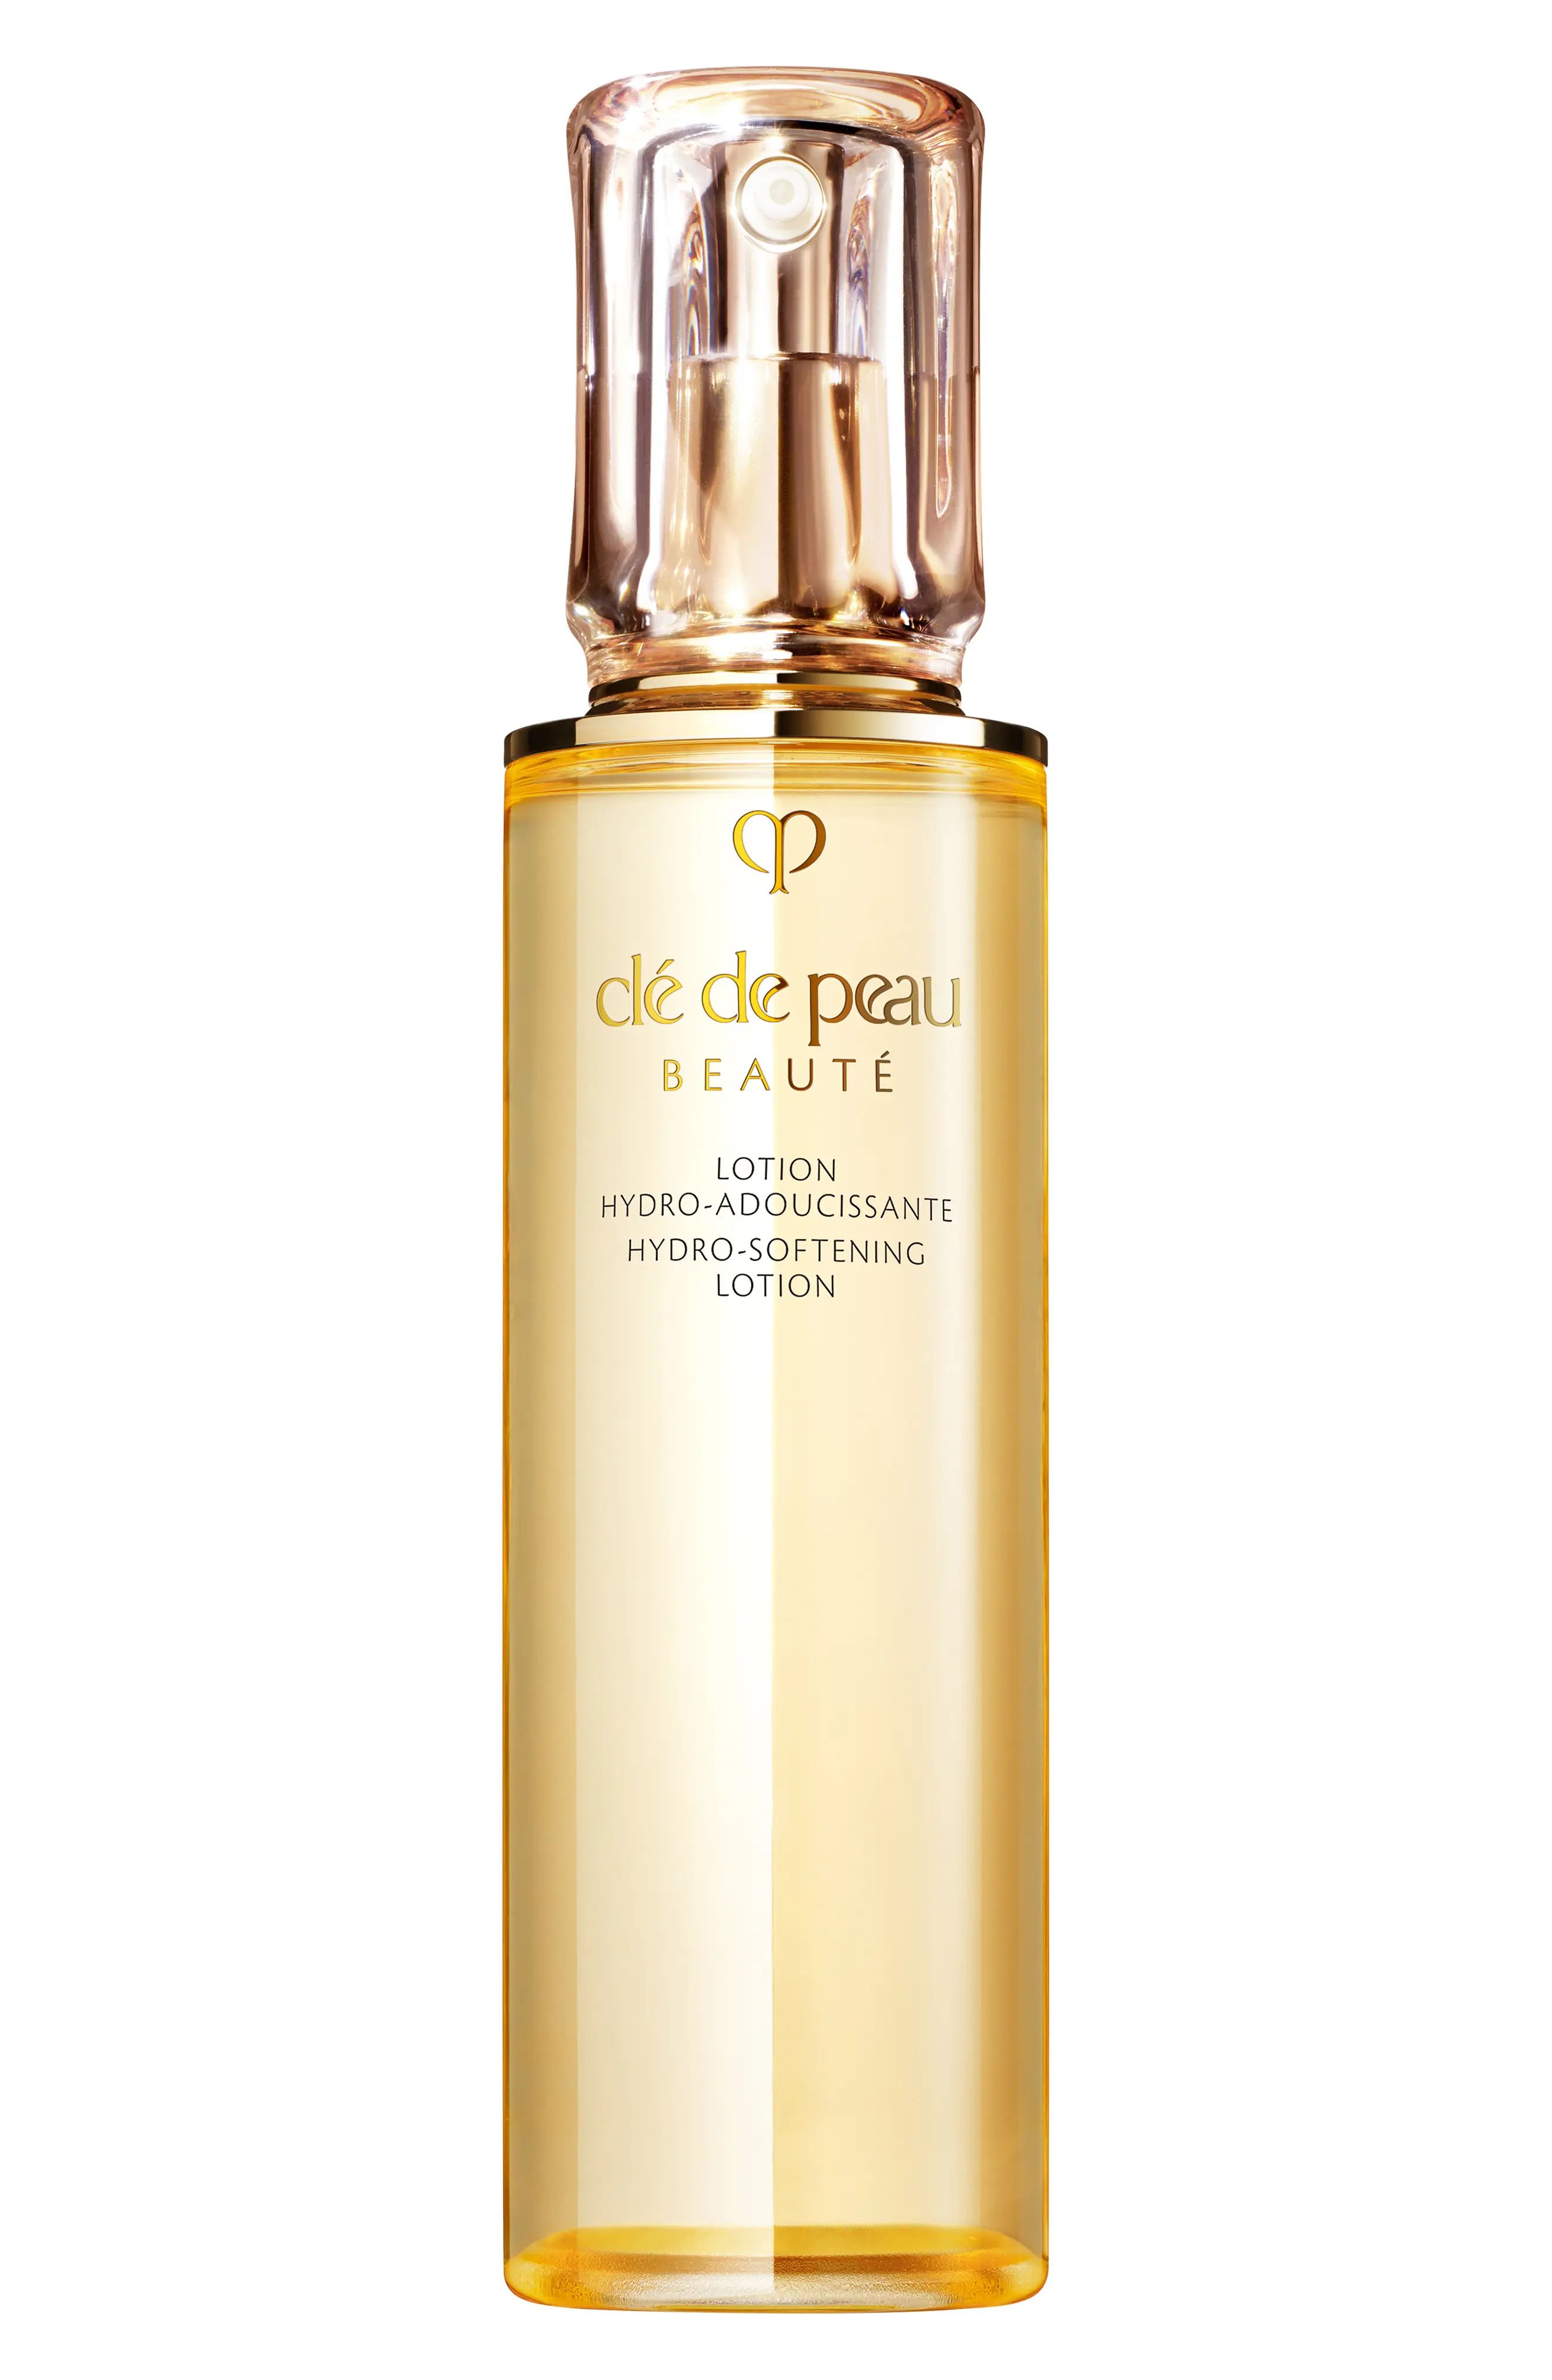 Cle de Peau Beaute Hydro-Softening Lotion, Size 5.7 Oz in No Color at Nordstrom | Nordstrom